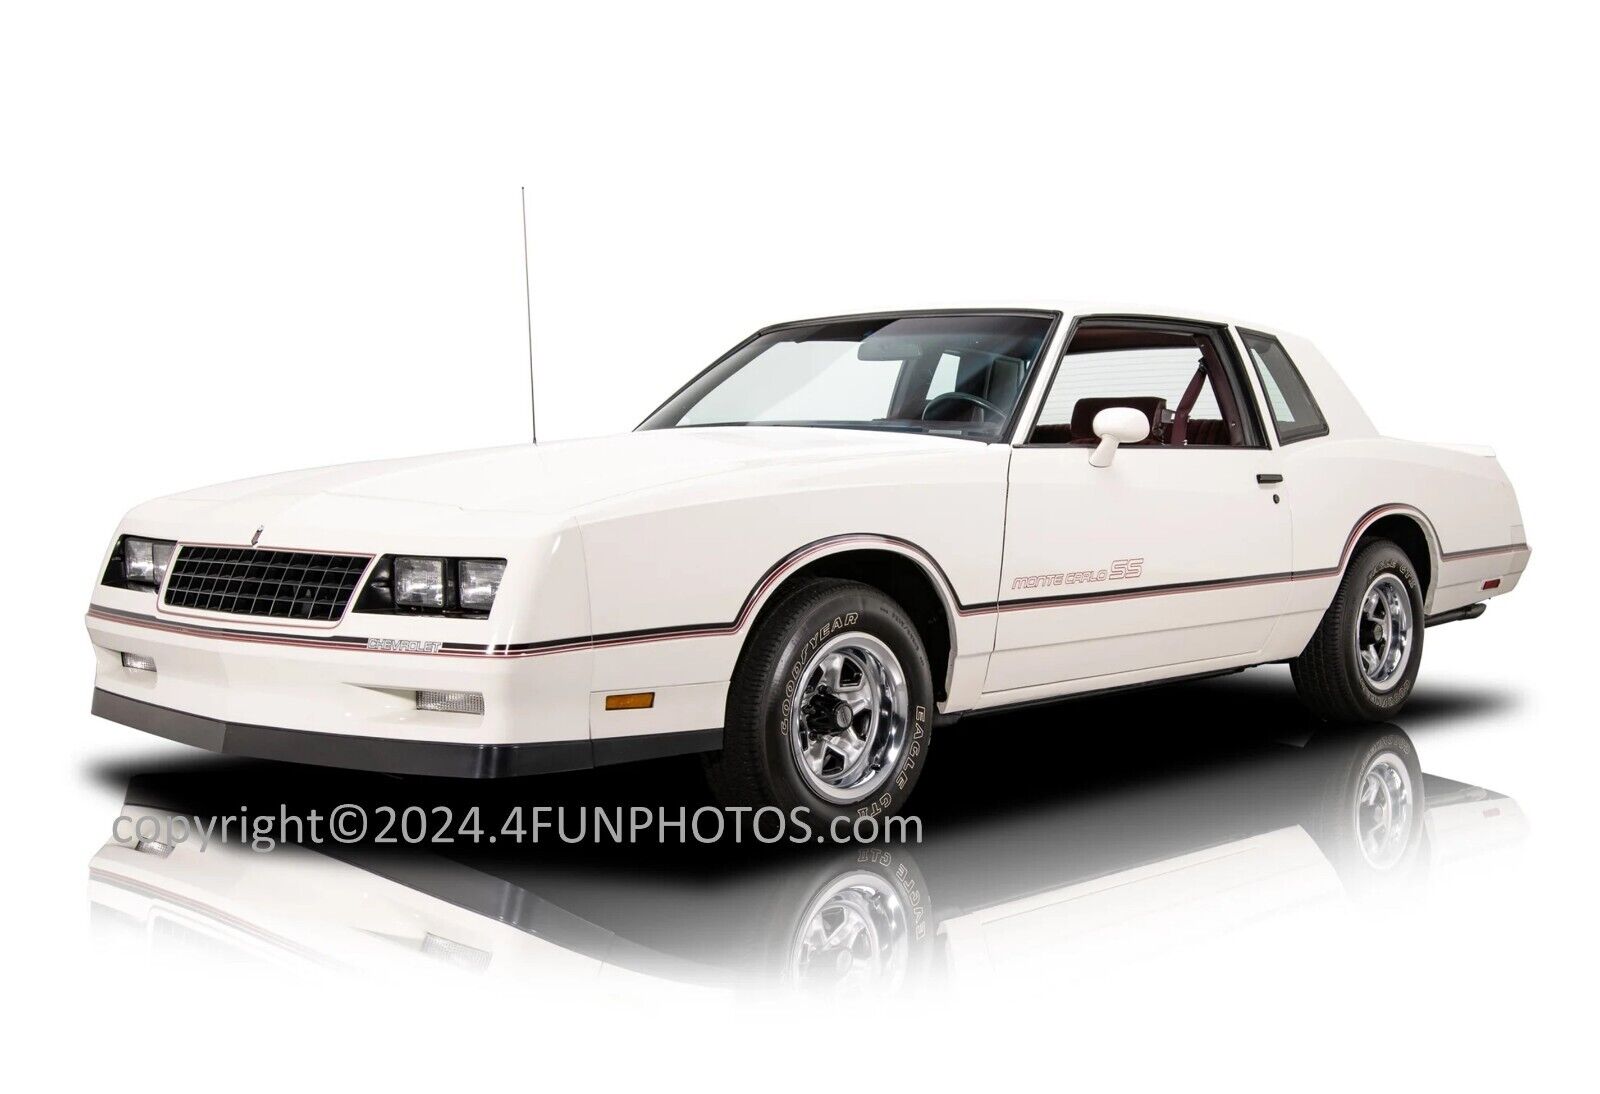 1985 Chevrolet Monte Carlo SS Muscle Car 13